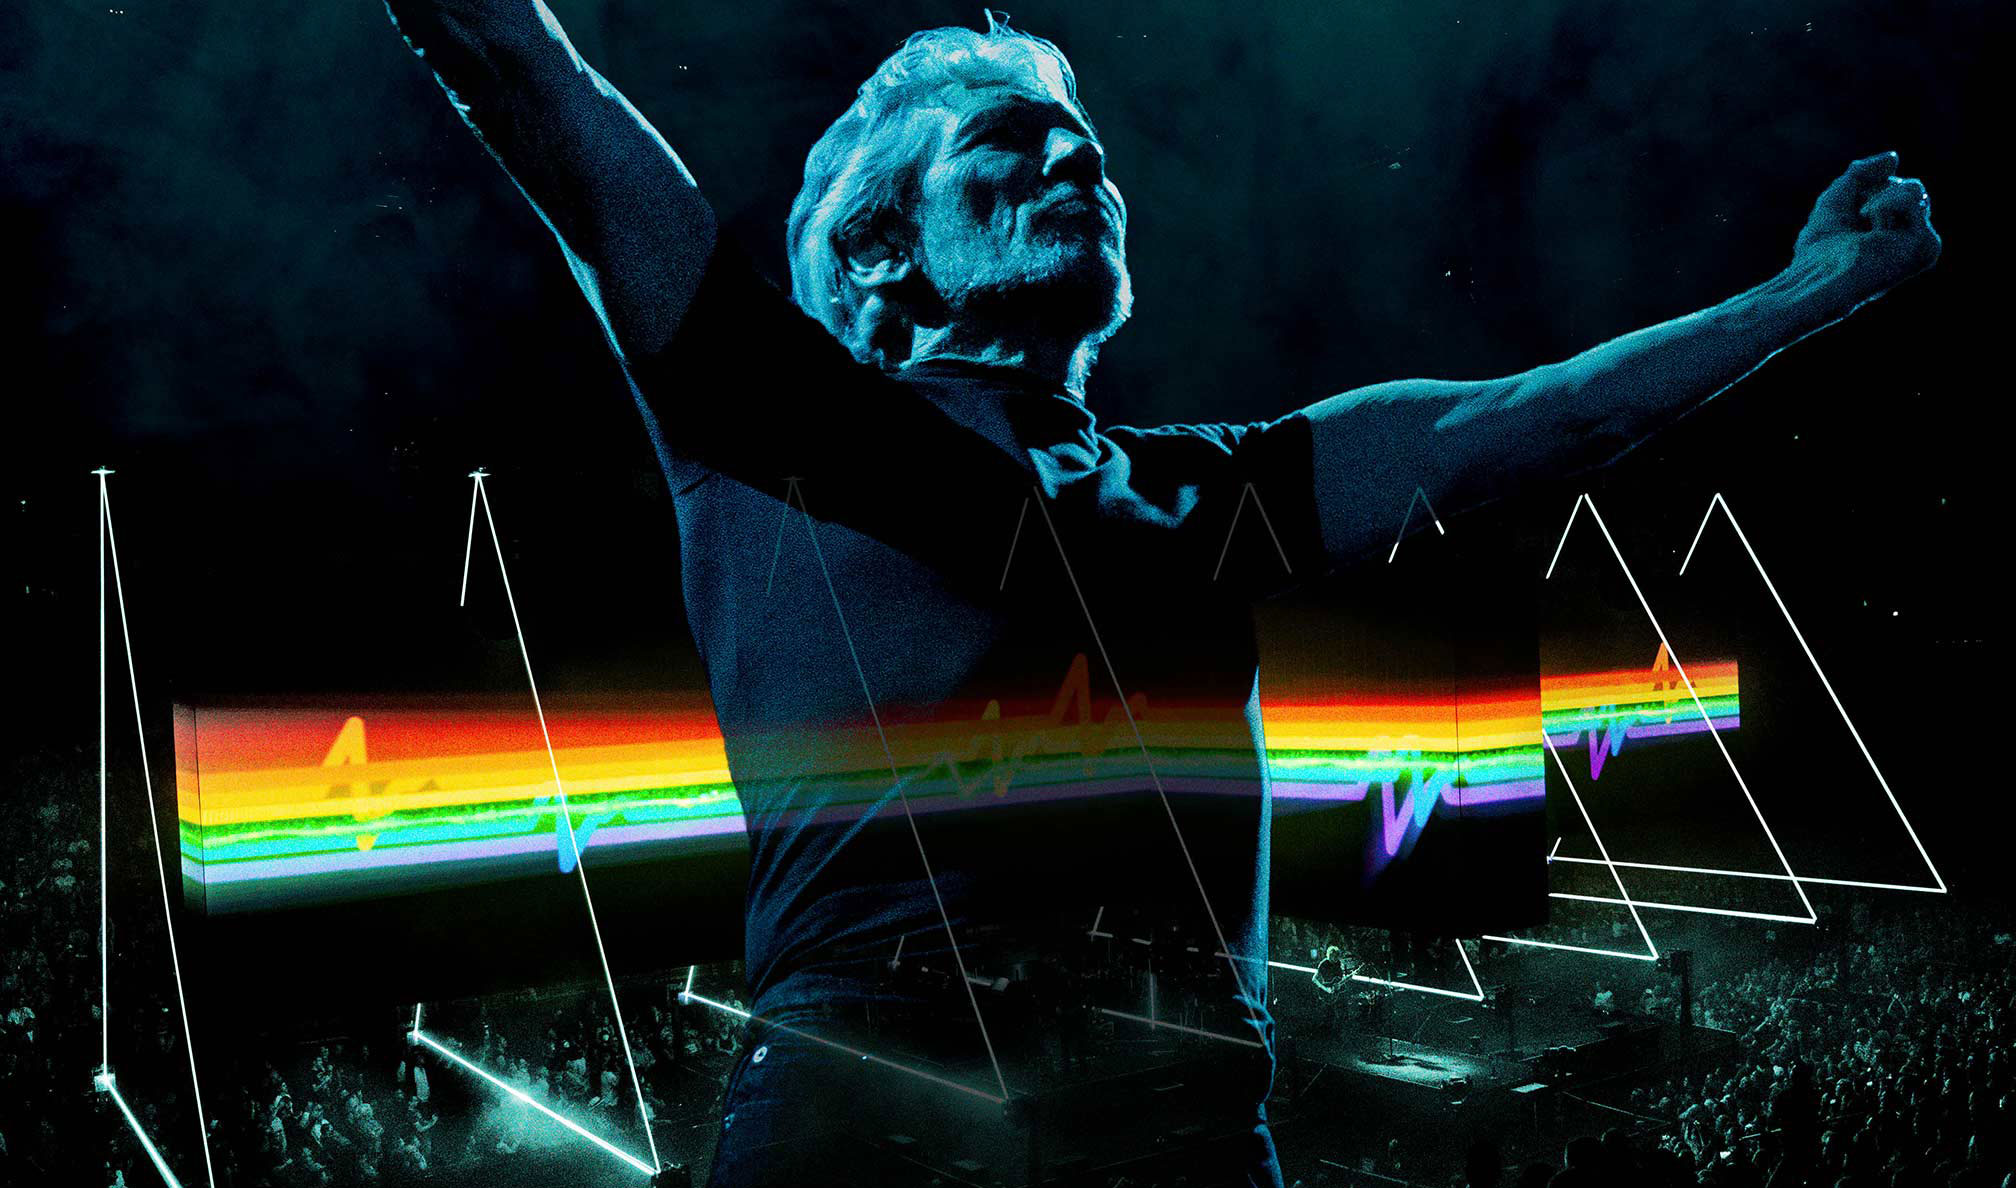 Roger Waters - This Is Not A Drill cinema 25 maggio 2023